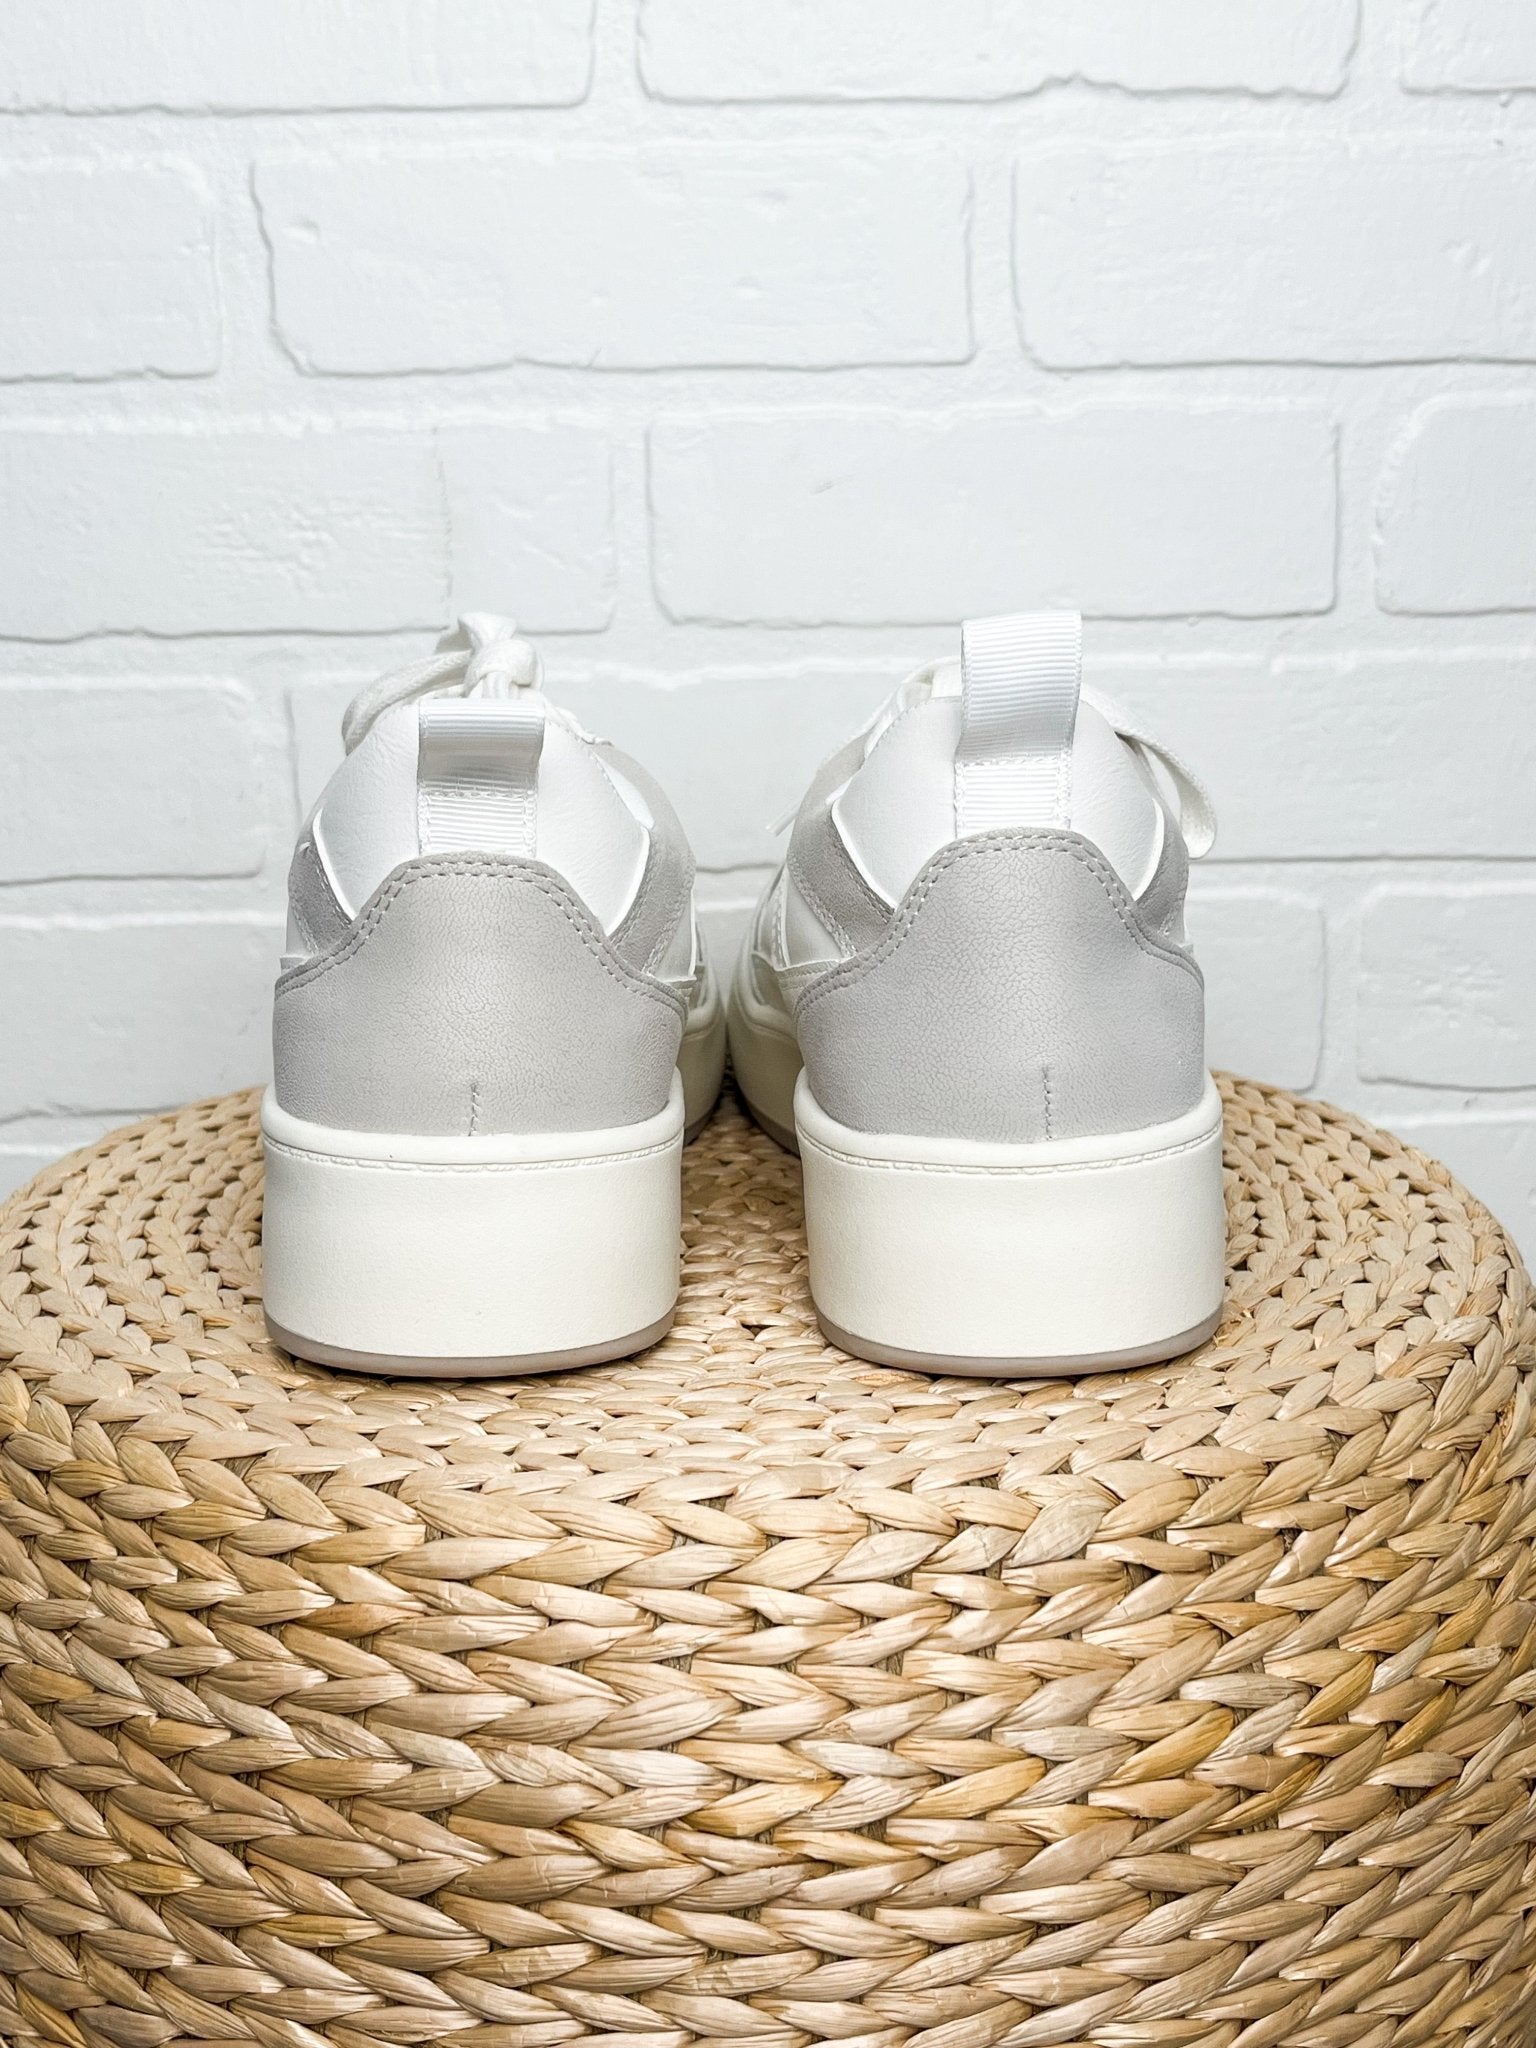 Malbru sneaker white - Affordable Shoes - Boutique Shoes at Lush Fashion Lounge Boutique in Oklahoma City